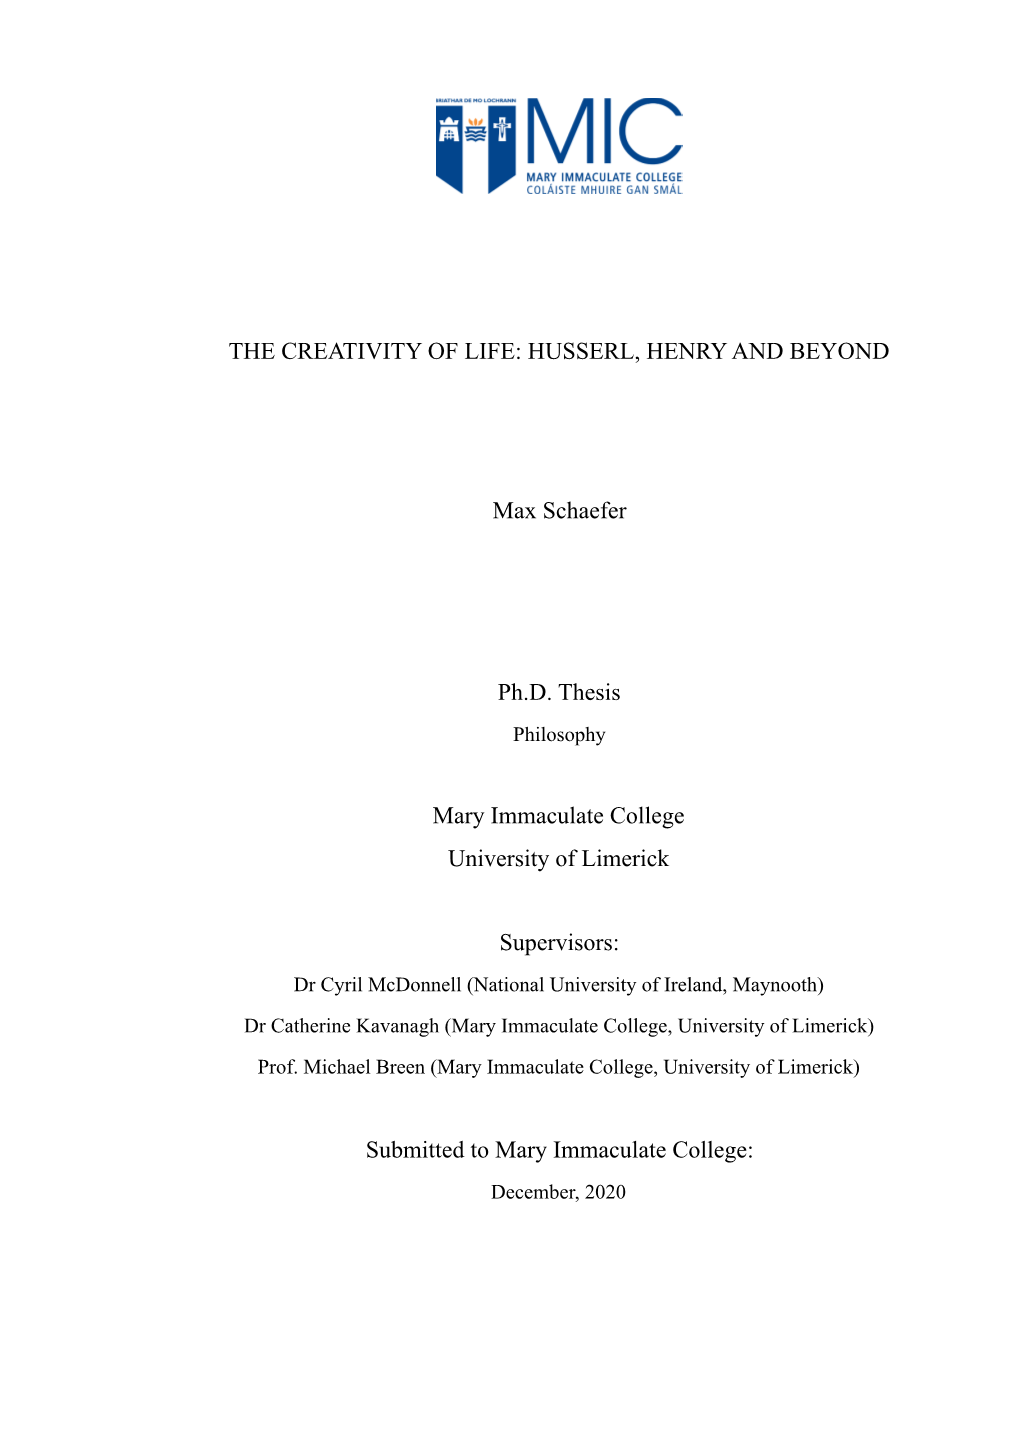 HUSSERL, HENRY and BEYOND Max Schaefer Ph.D. Thesis